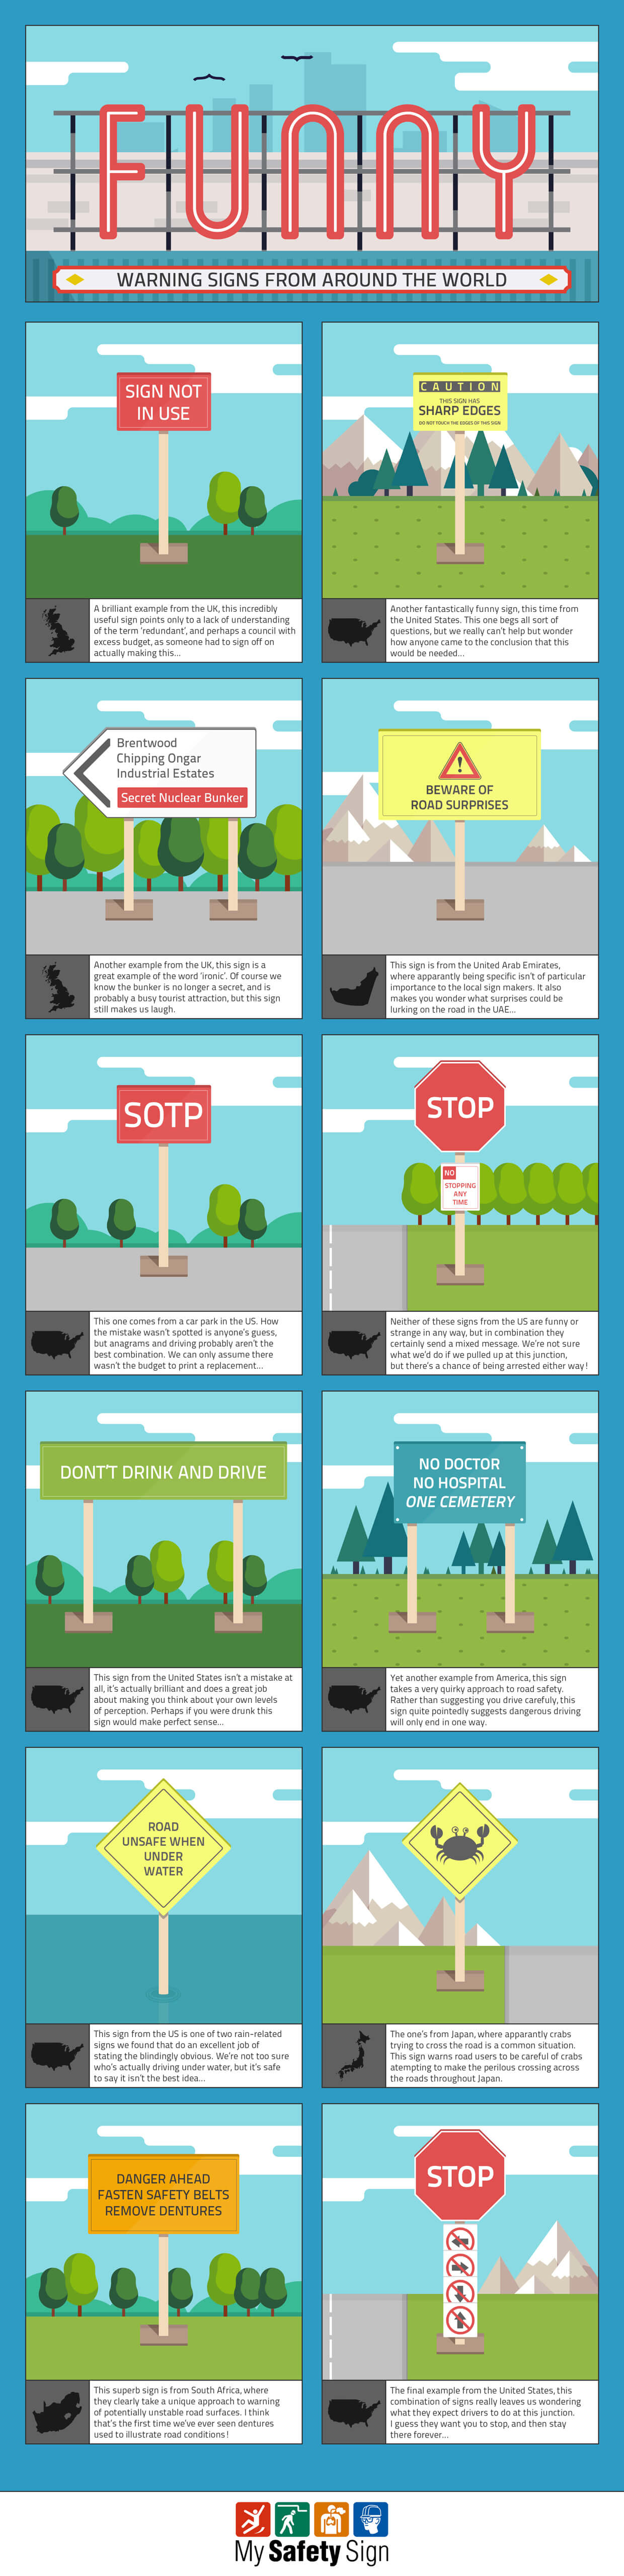 funny-warning-and-safety-signs-infographic-plaza